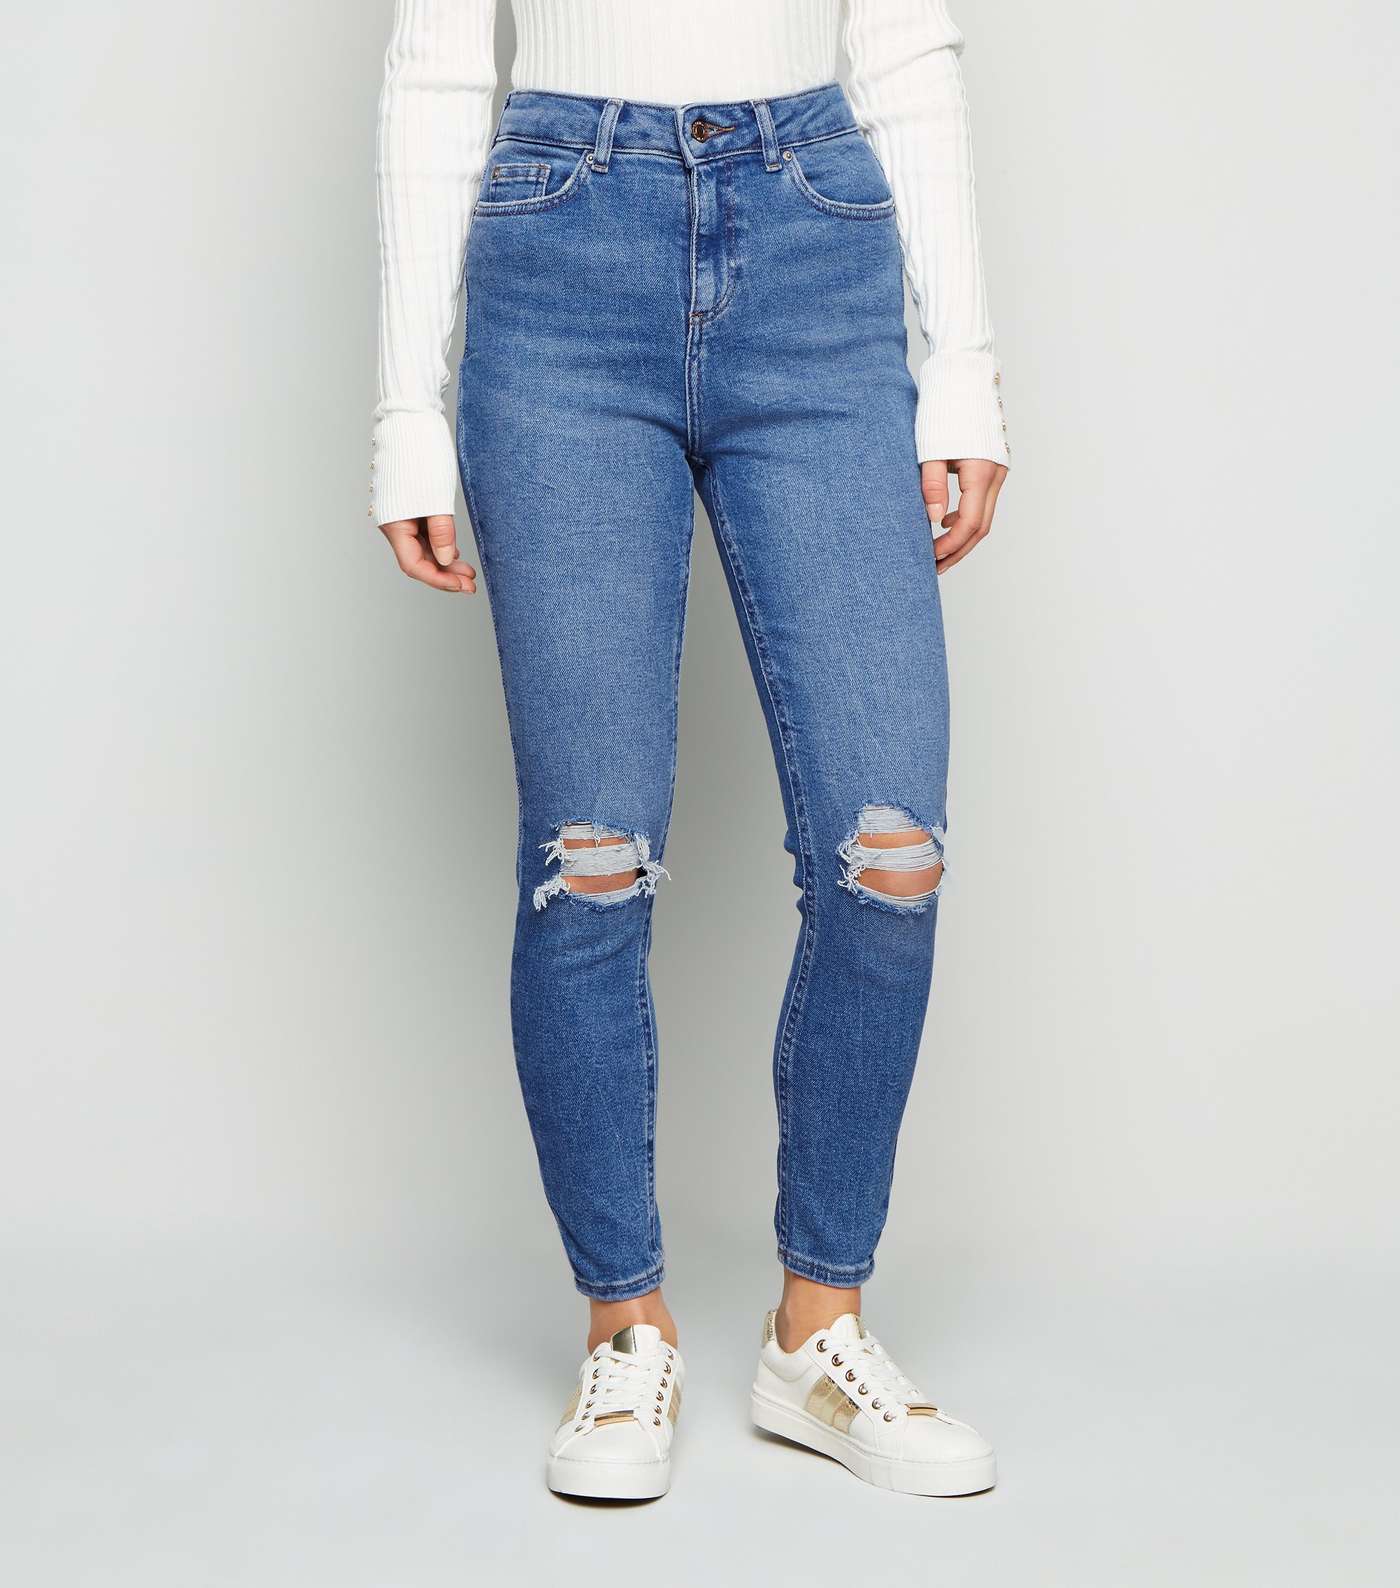 Petite Bright Blue Ripped High Waist Jeans Image 2